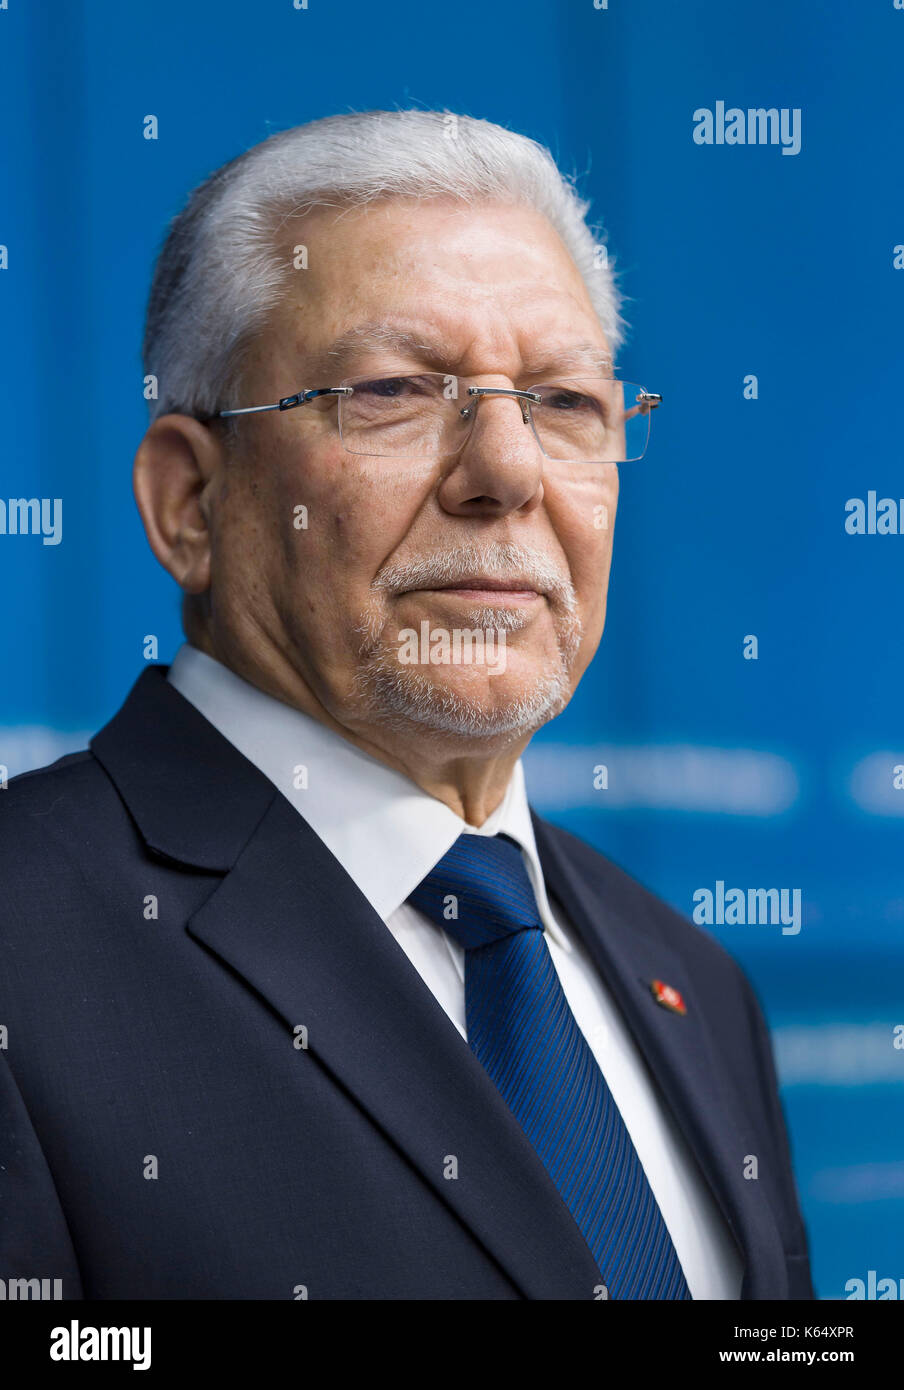 Belgium, Brussels, on 2015/03/17: Tunisian Minister of Foreign Affairs Taieb Baccouche attending the meeting of the EU-Tunisia Association Council Stock Photo